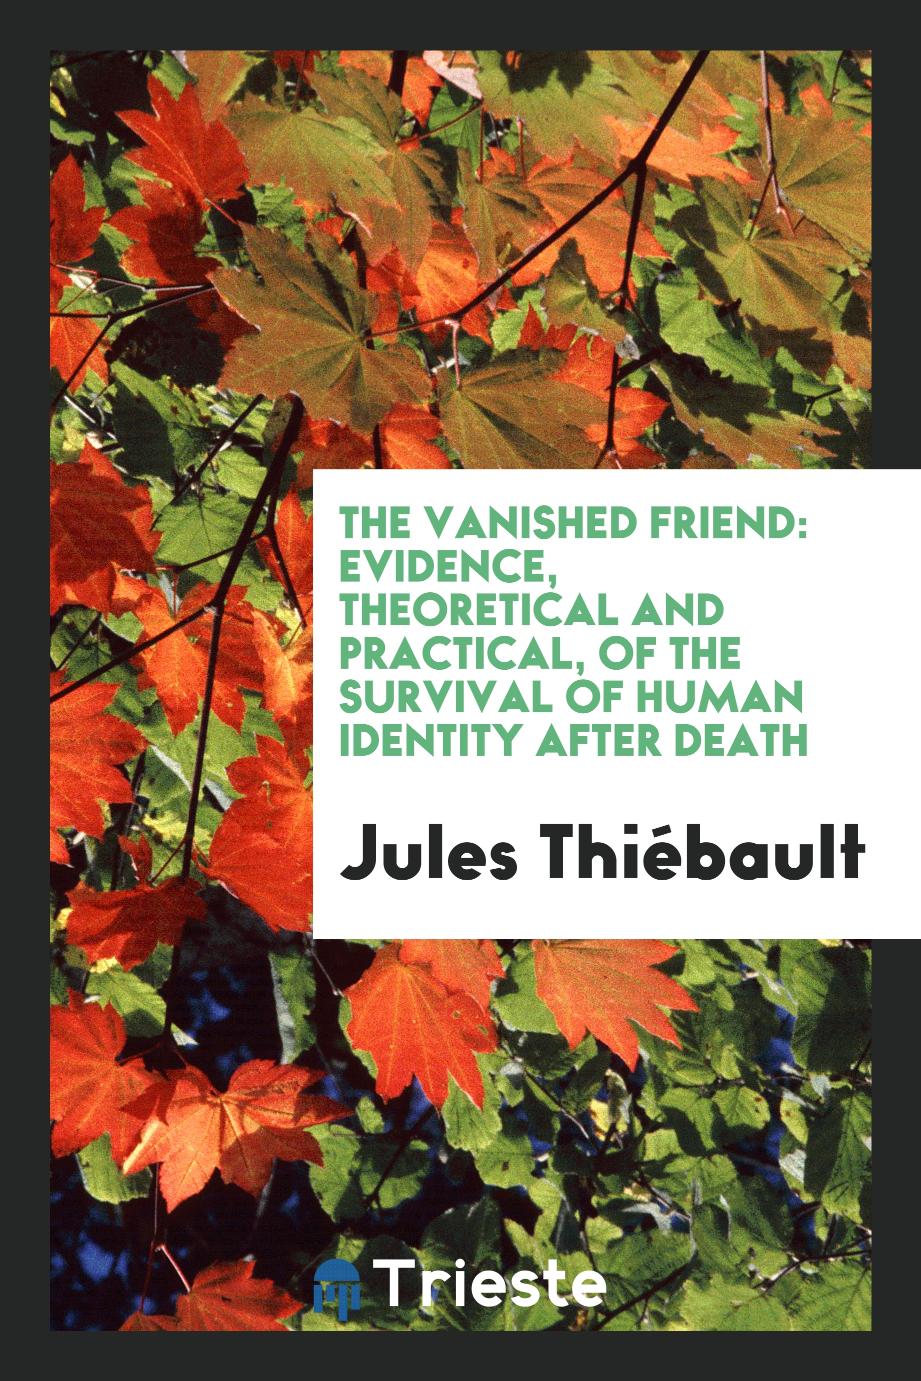 The Vanished Friend: Evidence, Theoretical and Practical, of the Survival of Human Identity after Death